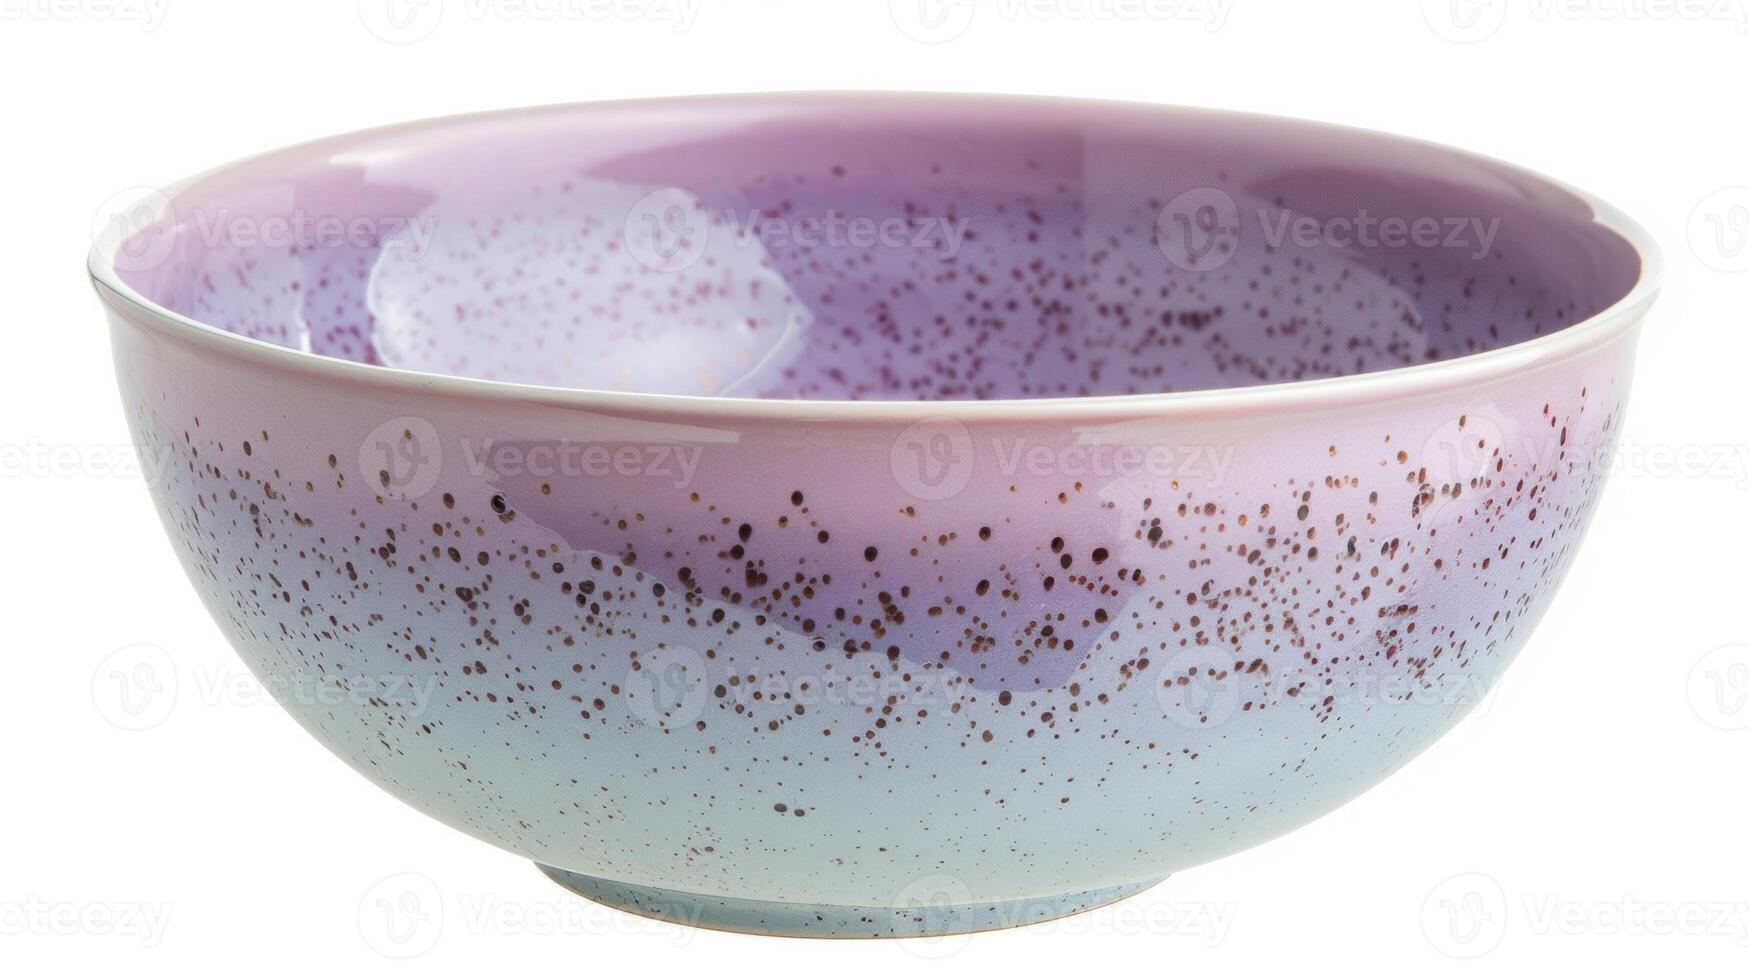 A delicate porcelain bowl with a speckled glaze effect showcasing soft pastel colors of lavender pink and light blue. photo